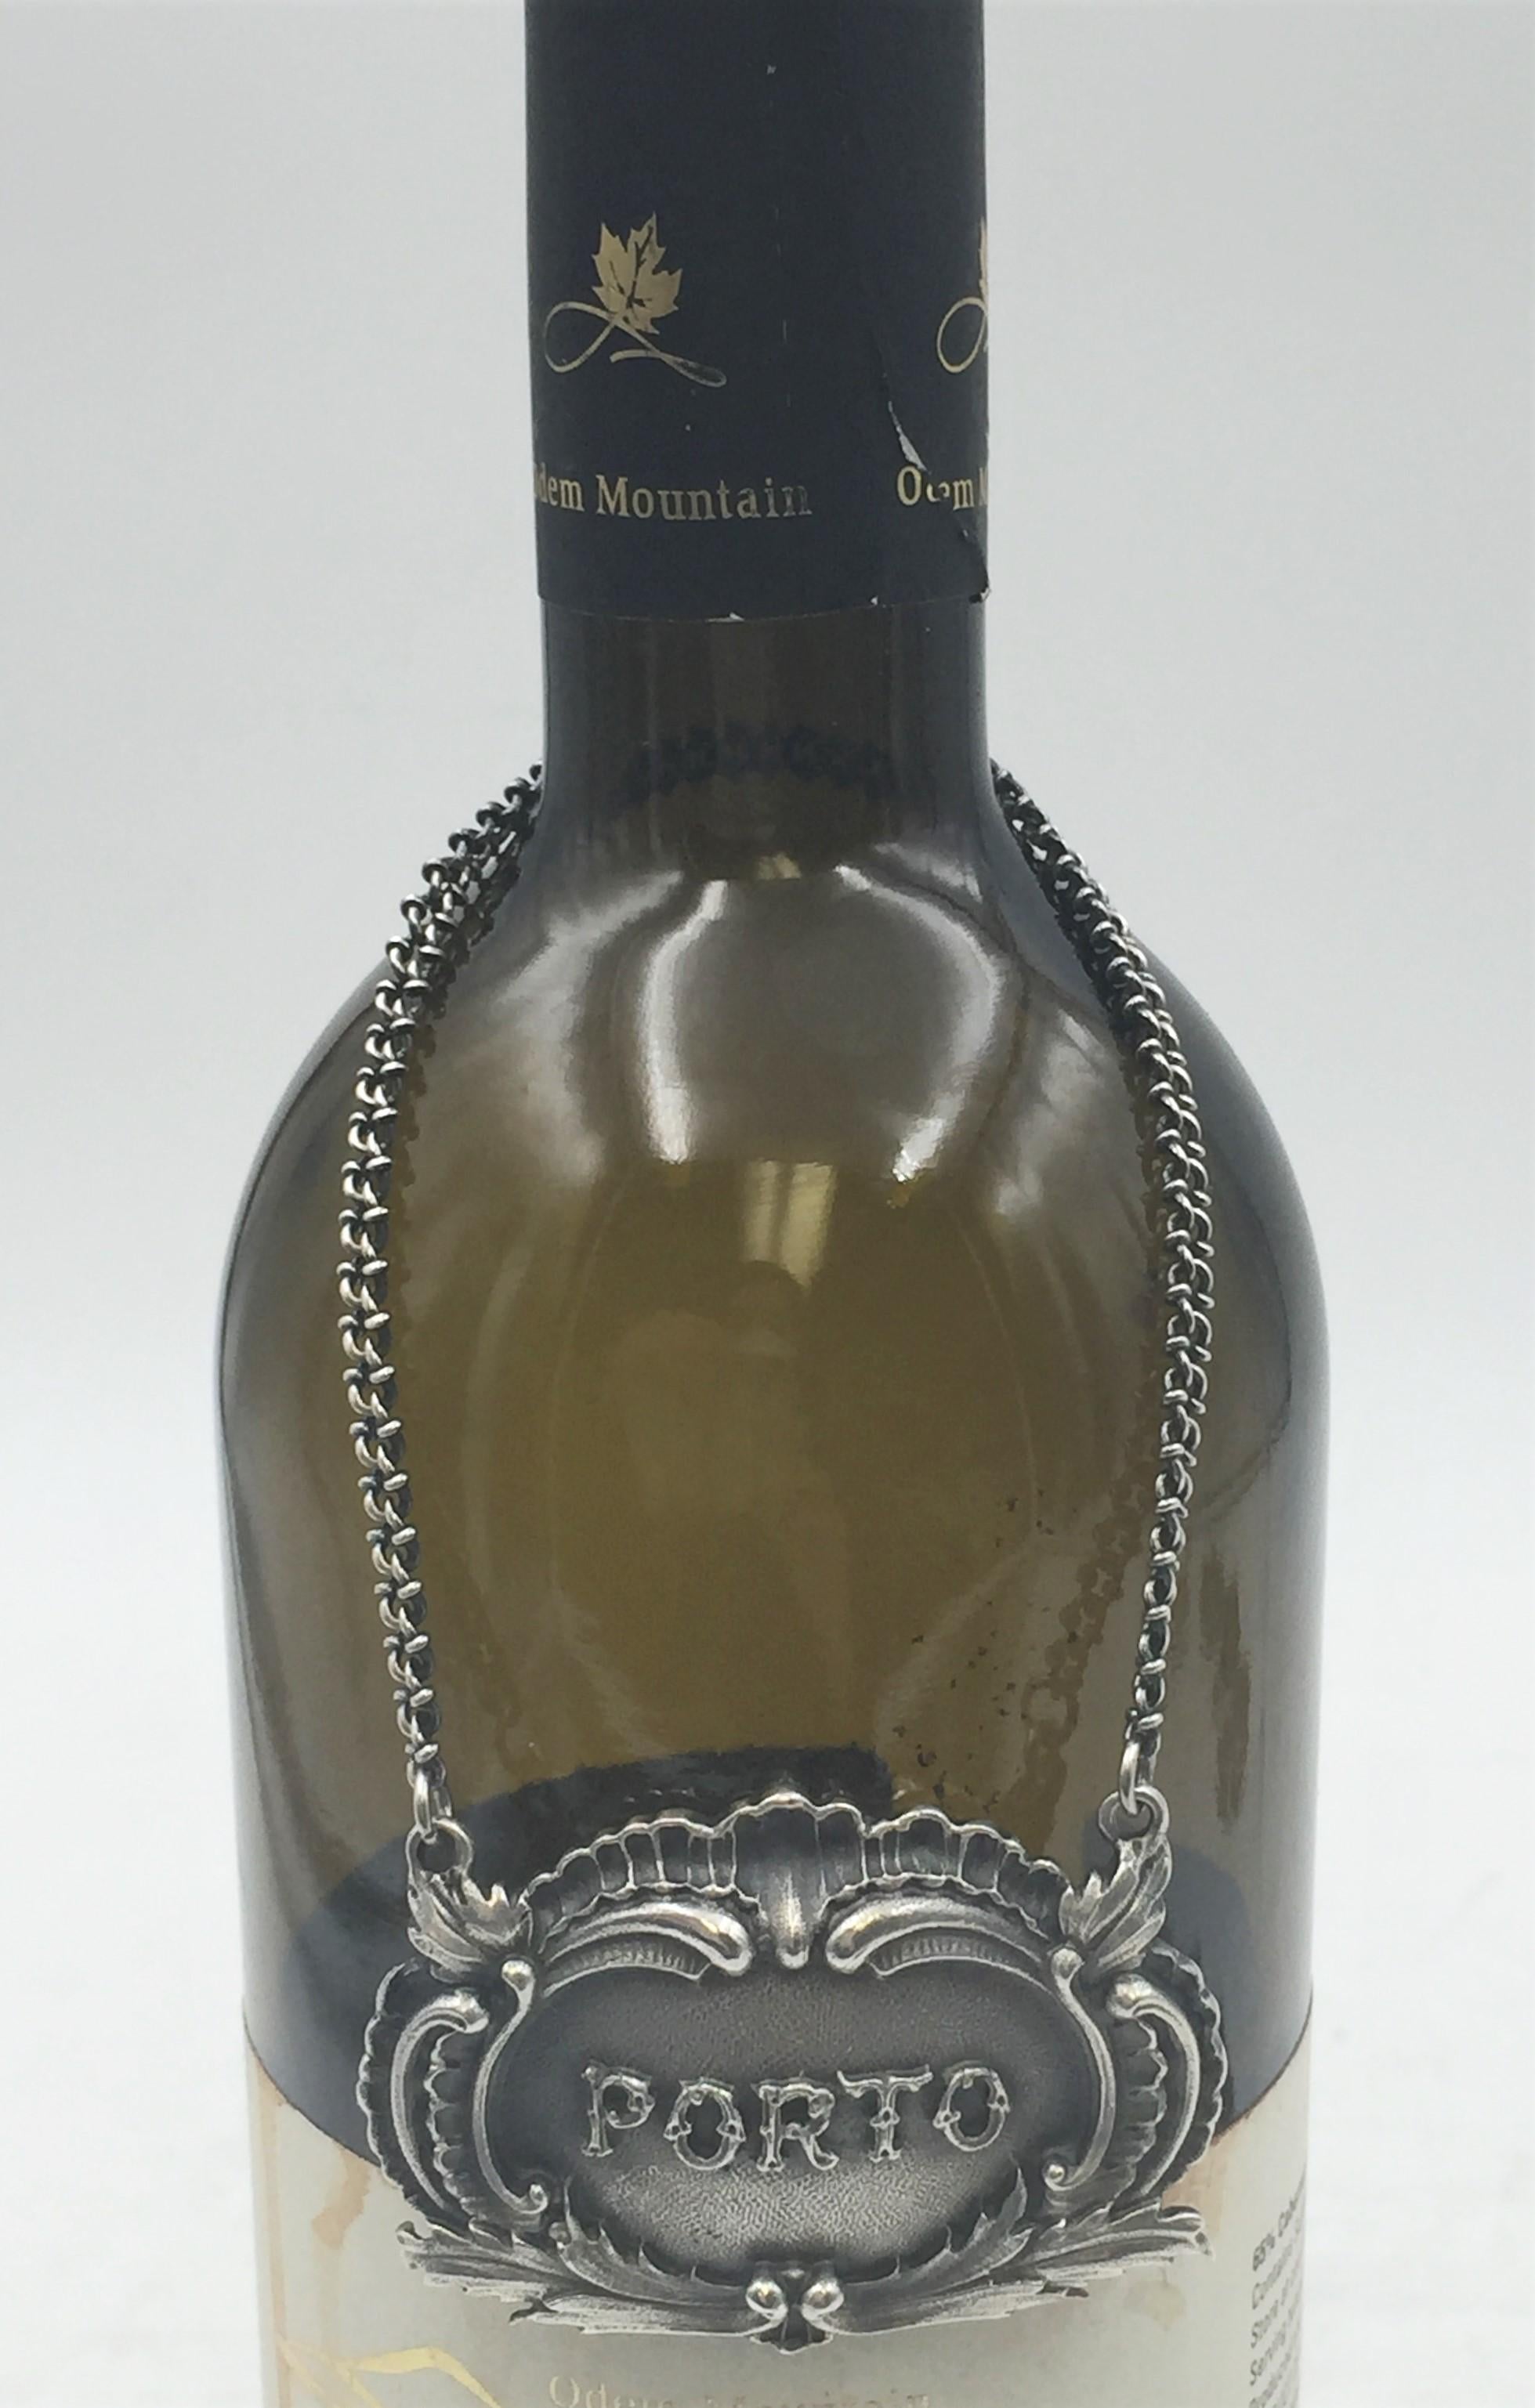 Rare Buccellati sterling silver claret jug bar label. PORTO embossed on the front in the center.

Marks on the back: Gianmaria Buccellati (signature and Italian maker's mark), ITALY, 925 (encircled silver purity mark).

It measures 2.25in x 1.25in.